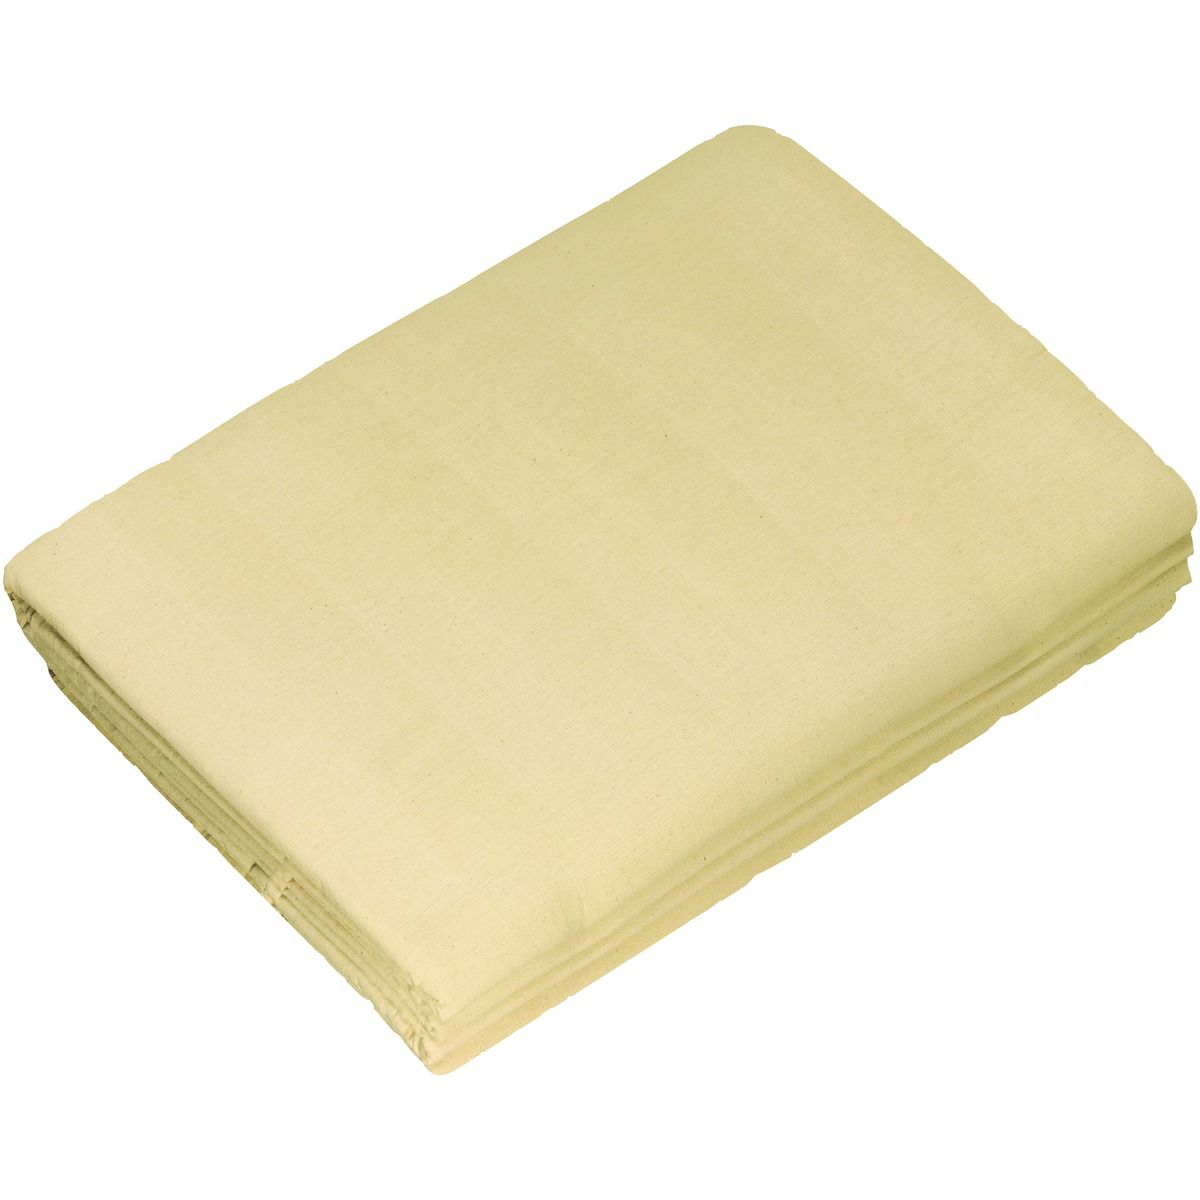 Image of Heavy Duty Cotton Dust Sheets - 3.6 x 2.7m - Pack of 3